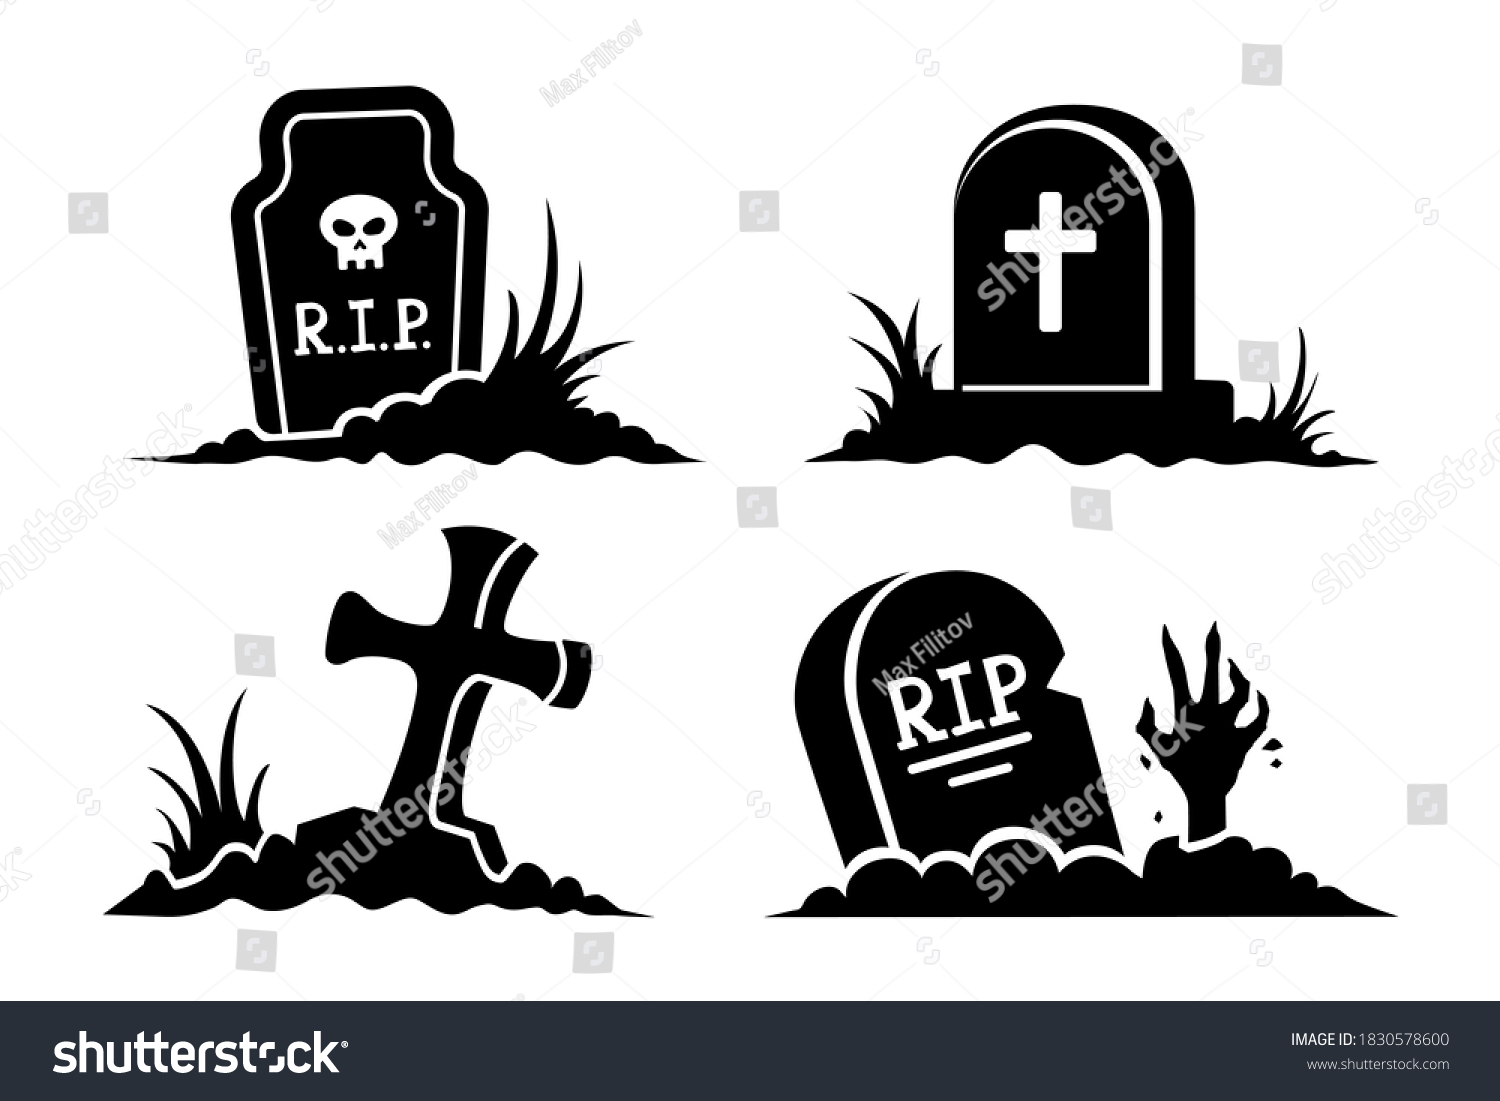 Grave. Graveyard elements icons. Halloween stickers. Black silhouettes and icons of graves in vector set. Gravestones of different shapes and cross isolated on white background. #1830578600